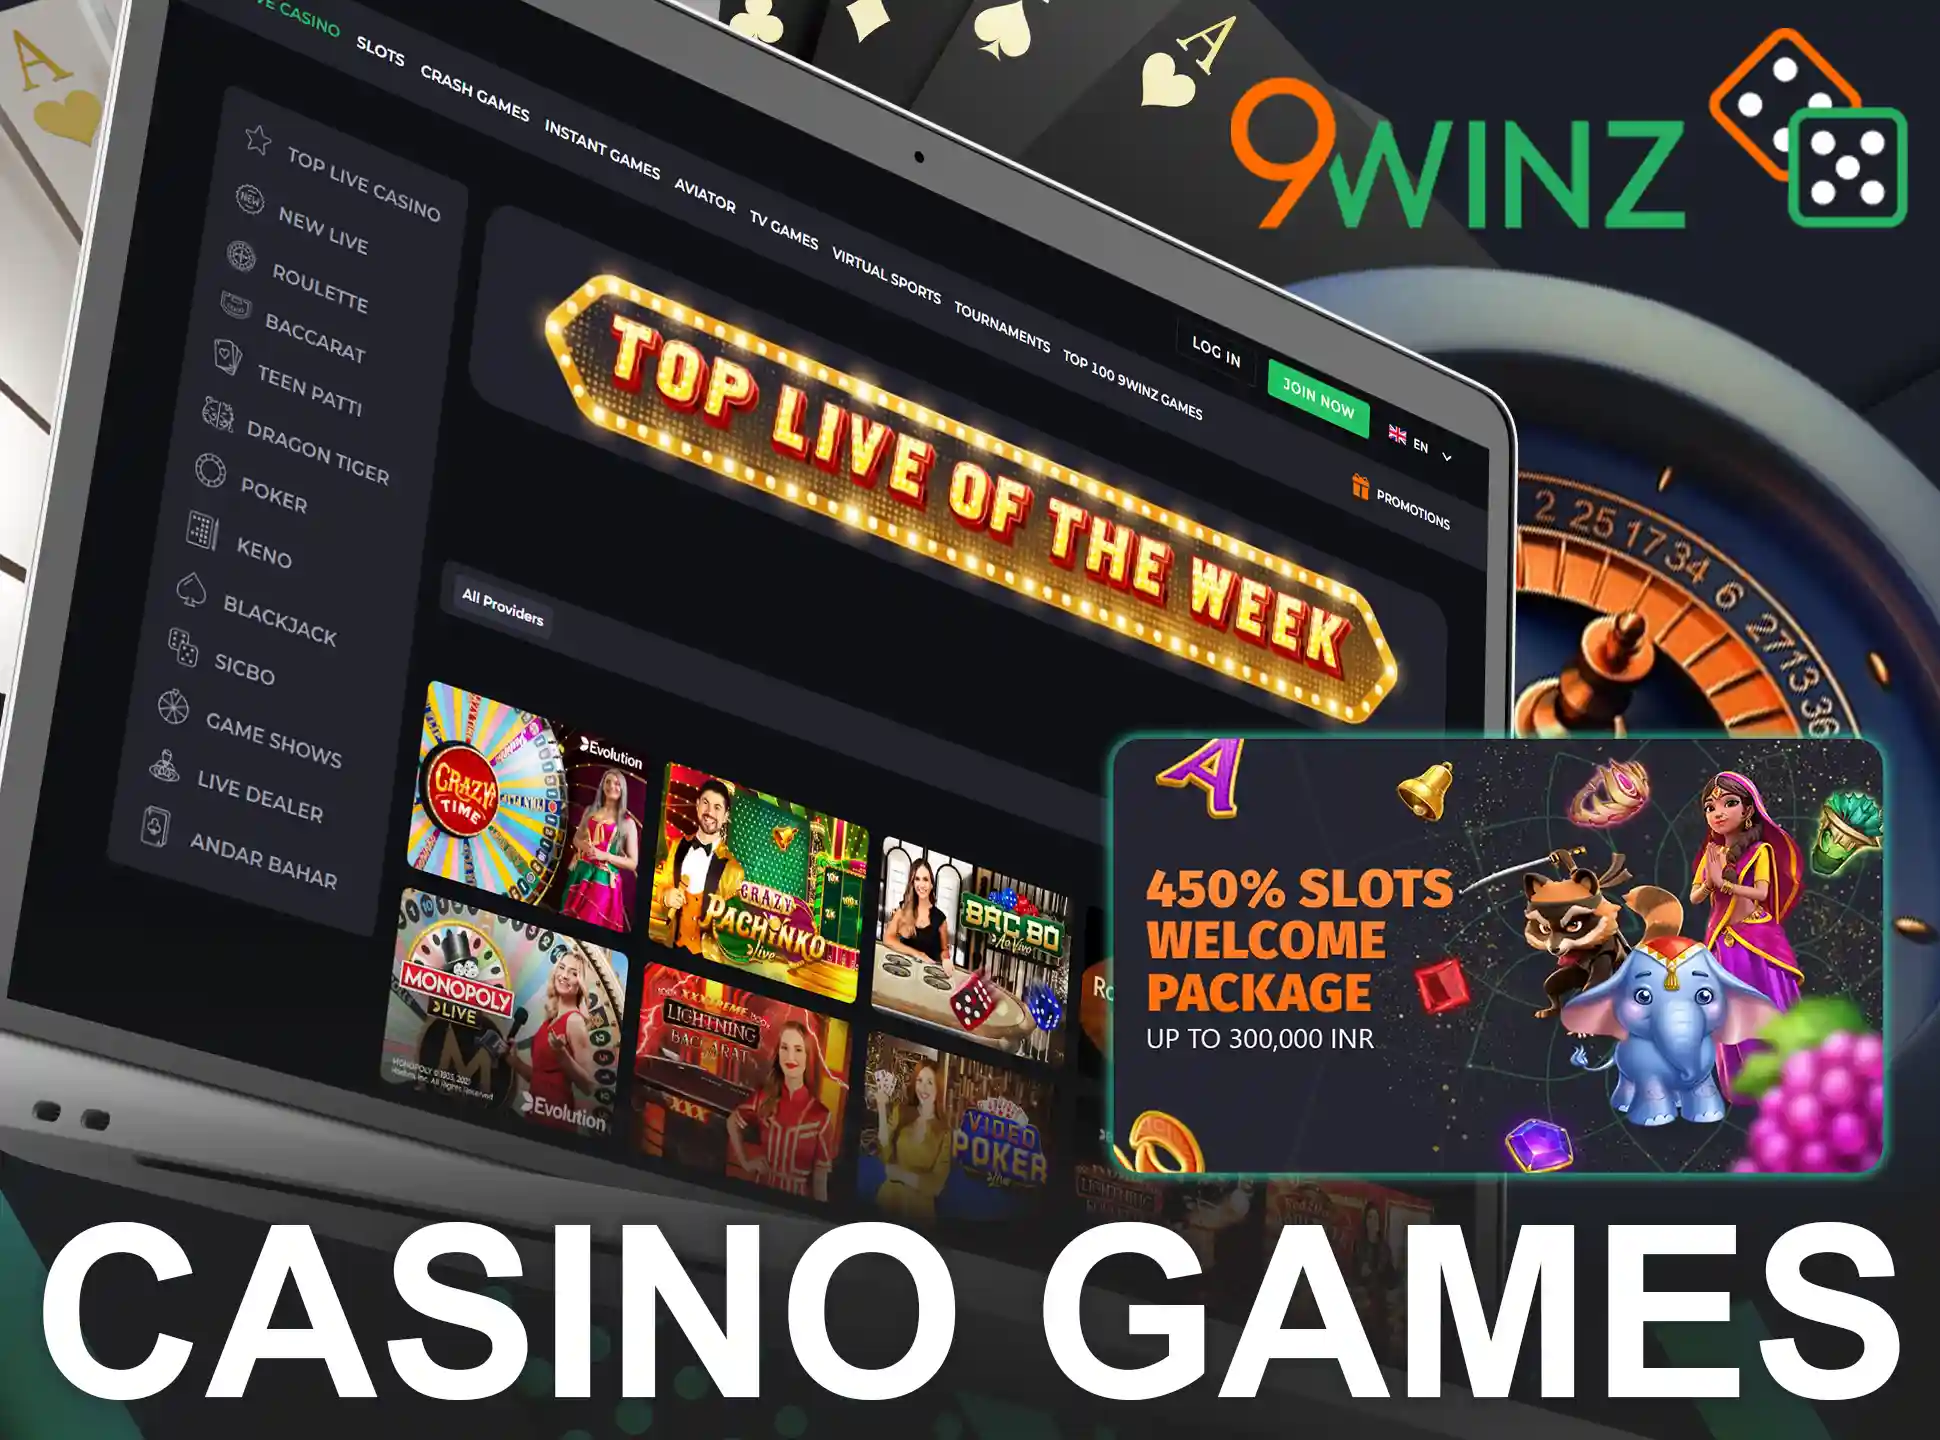 Play at 9Winz Casino online and choose a 450% welcome bonus of up to INR 300,000.